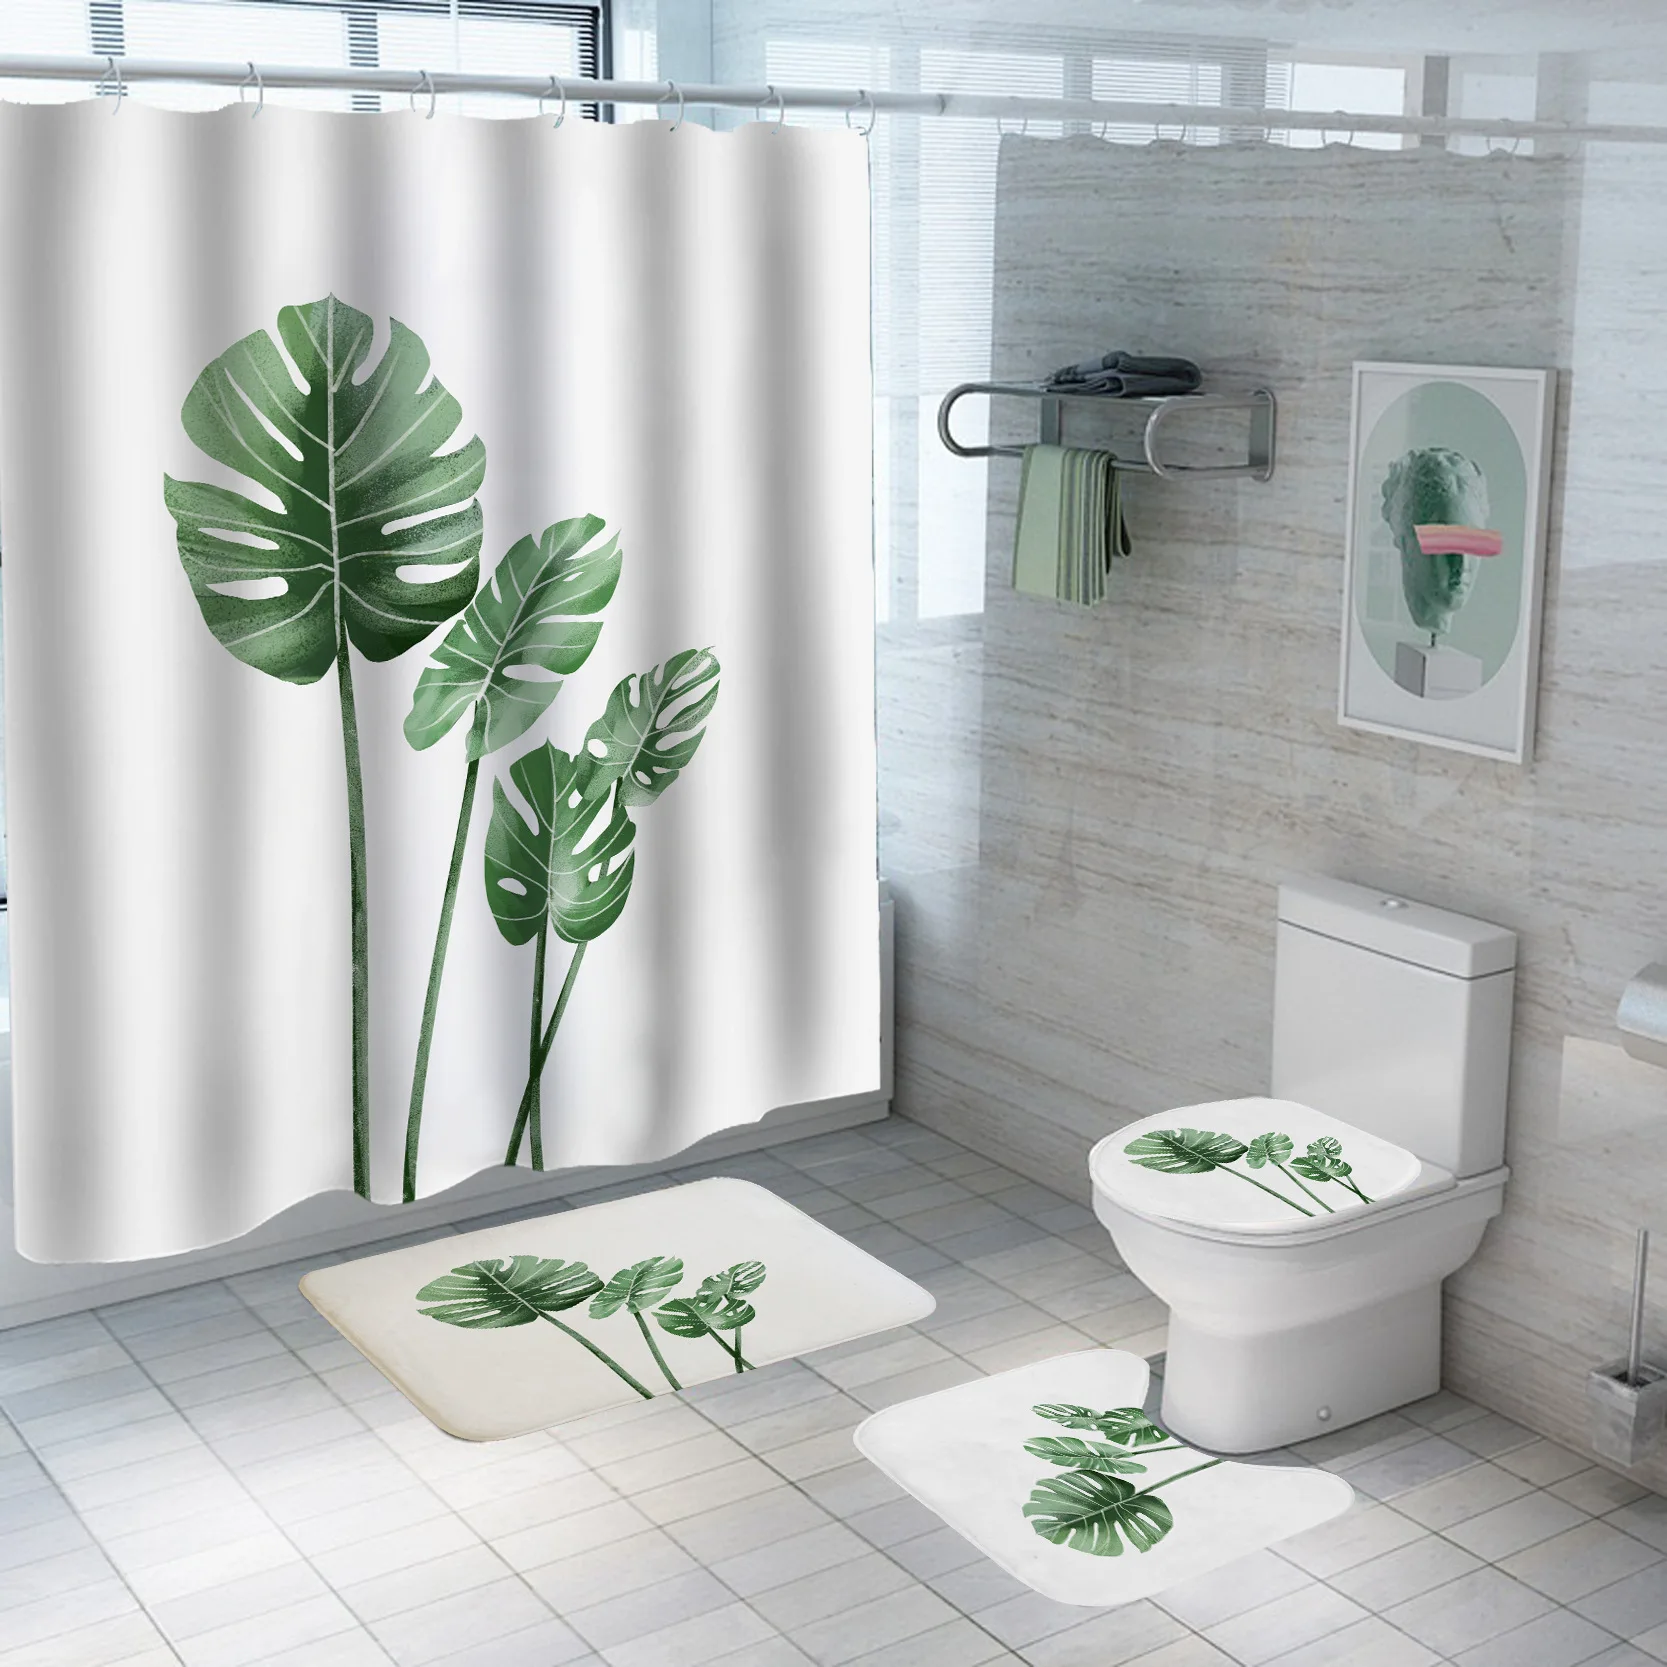 

i@home 180X180 cm 3D leaf custom print waterproof bathroom sets with rugs shower curtain set 4 pcs, Picture